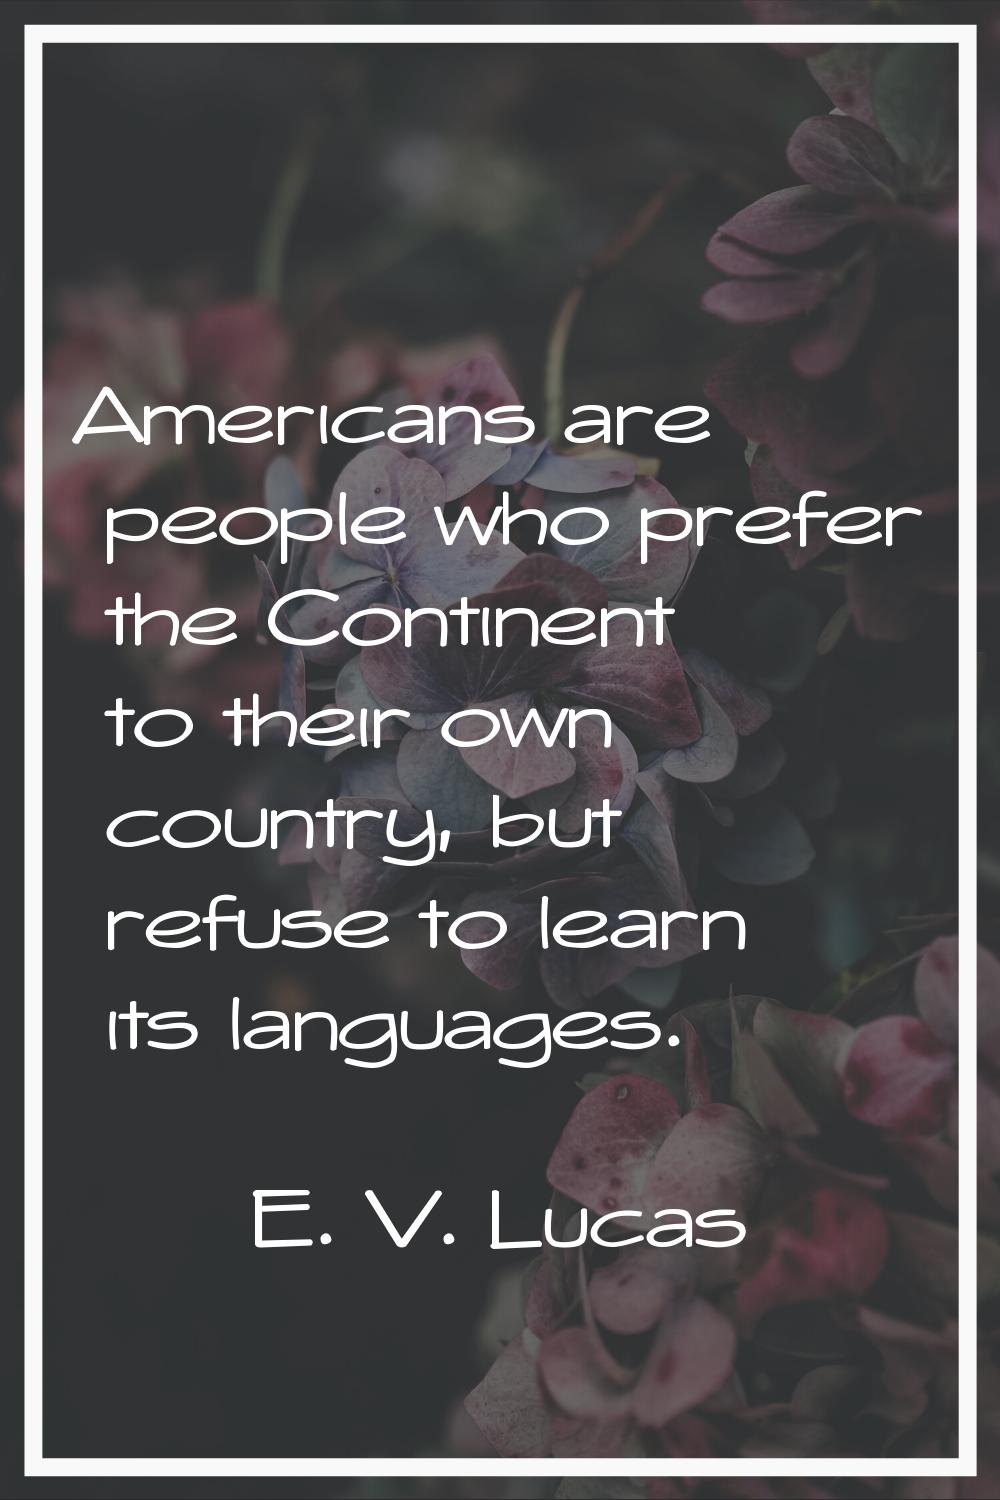 Americans are people who prefer the Continent to their own country, but refuse to learn its languag